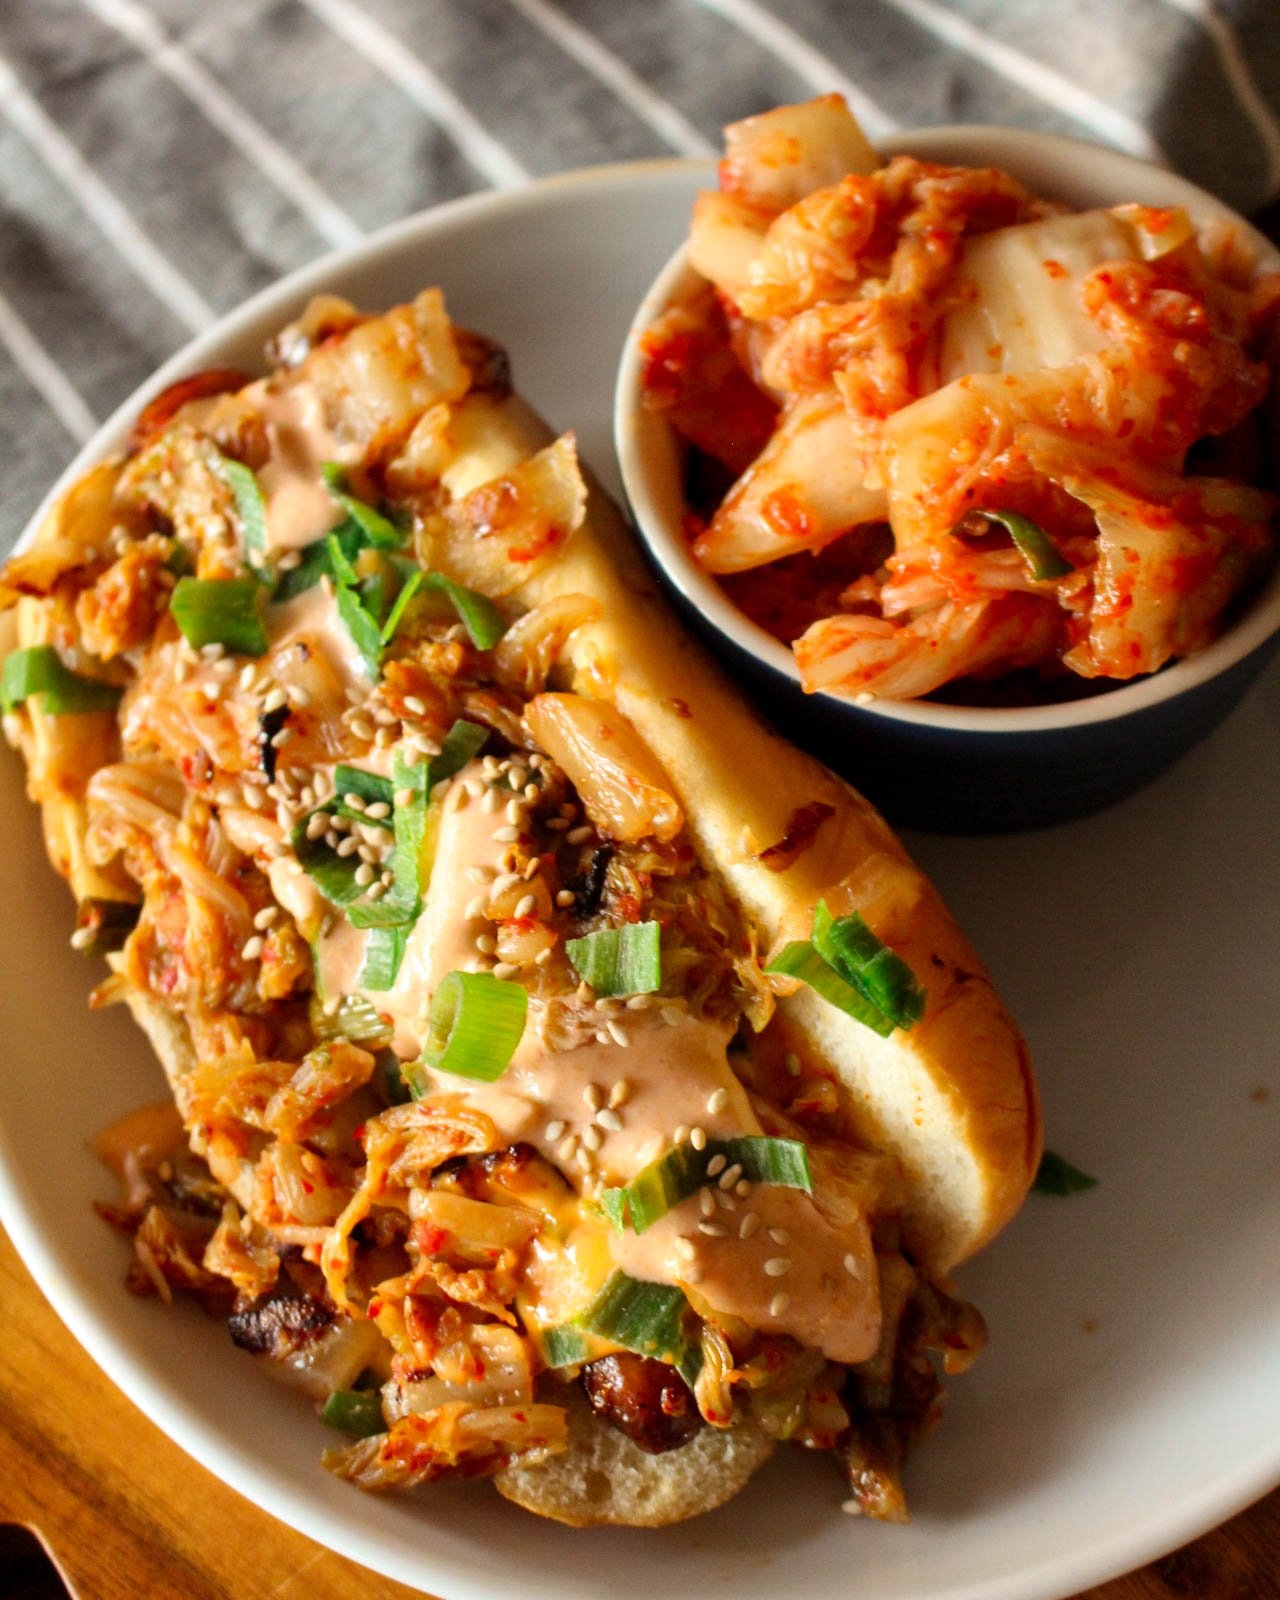 Korean Hot Dog, Delicious Recipe, Very Easy and Cost-Effective! 